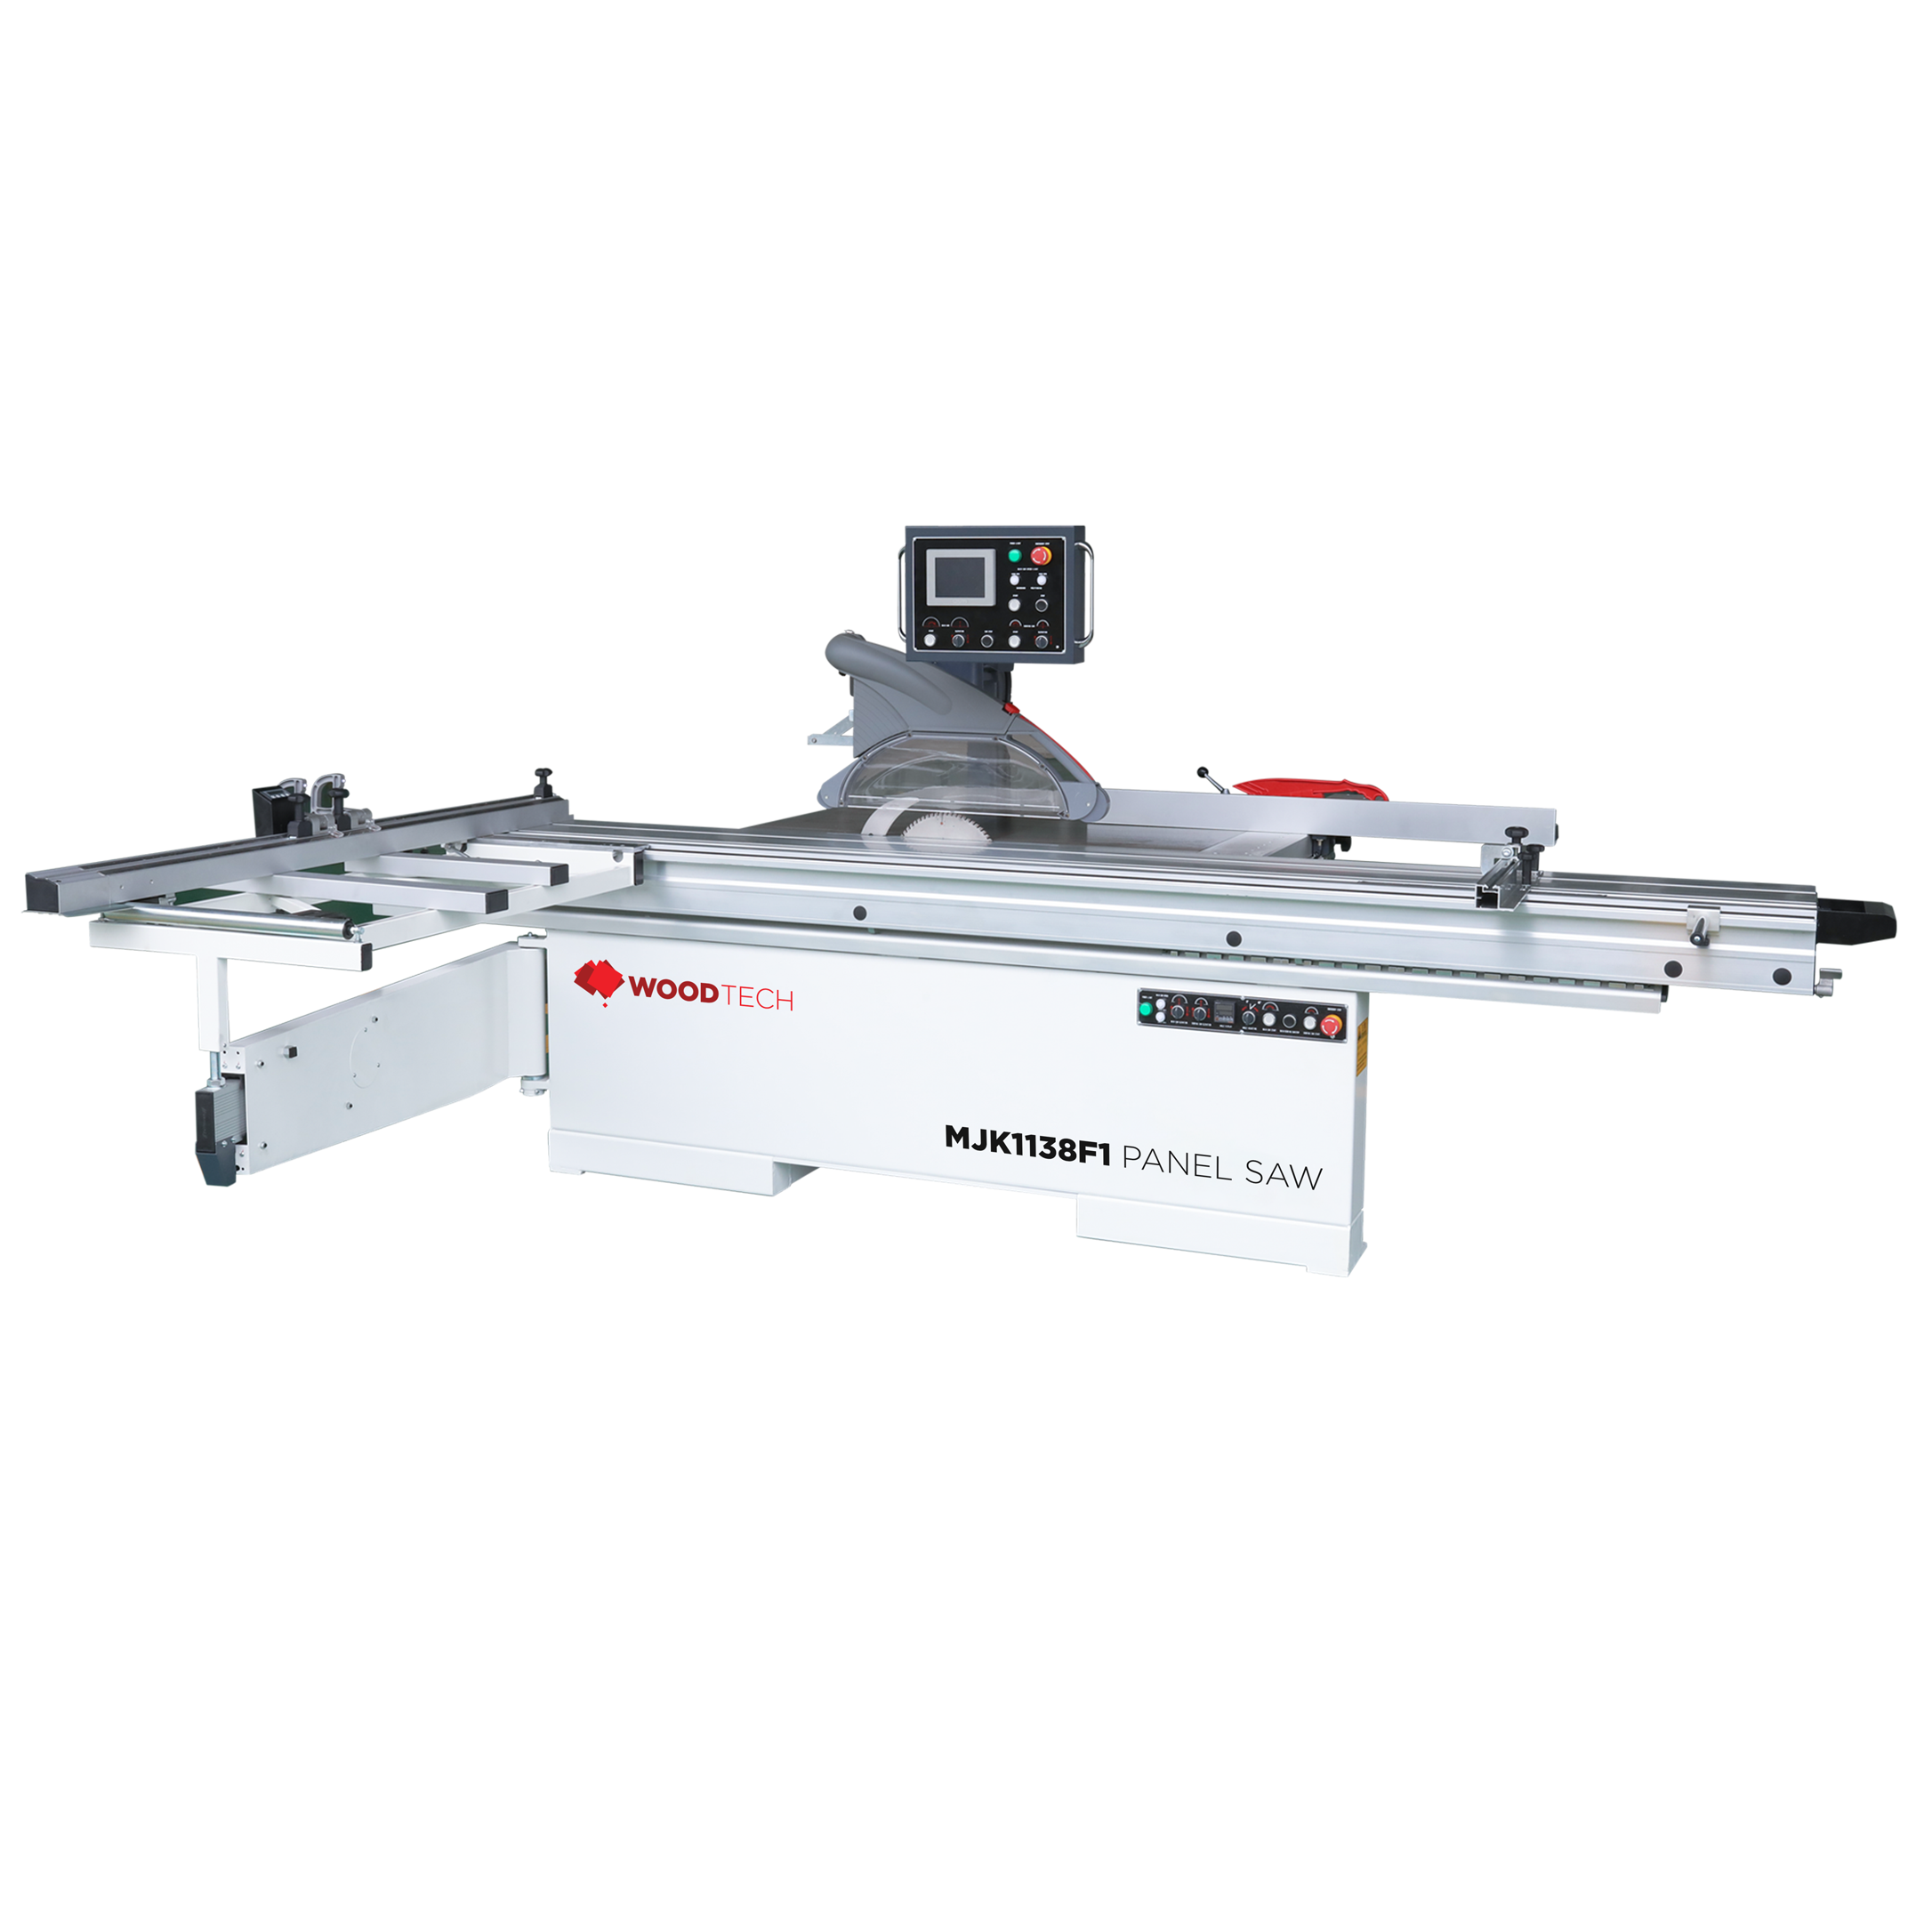 MJK1138F1 Panel Saw 3.8m with Electric Rise/Fall and Tilt